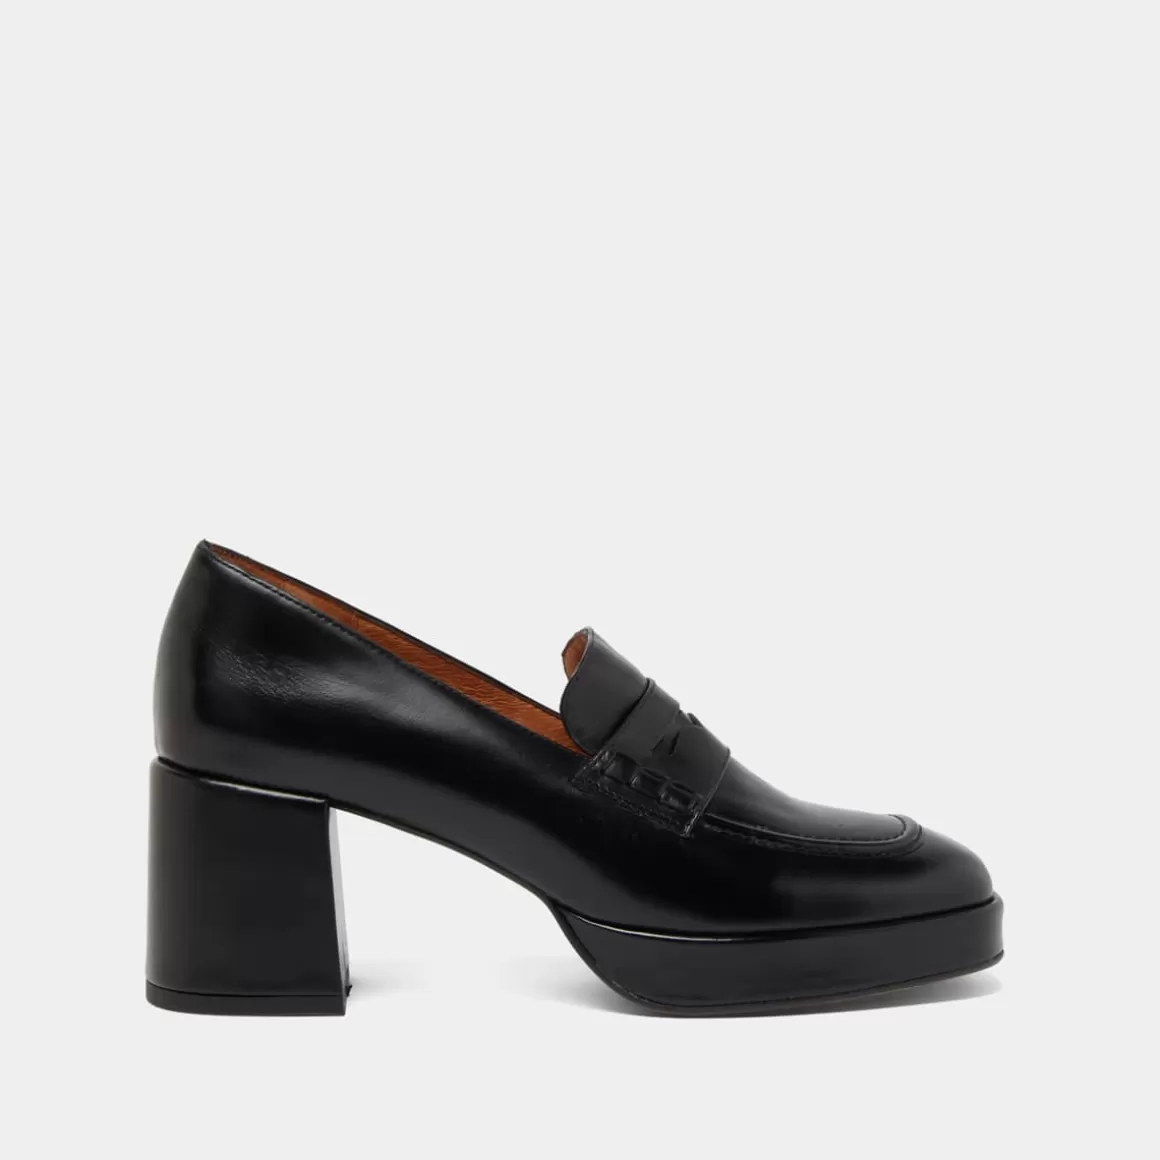 Heeled loafers with rounded tips<Jonak Hot